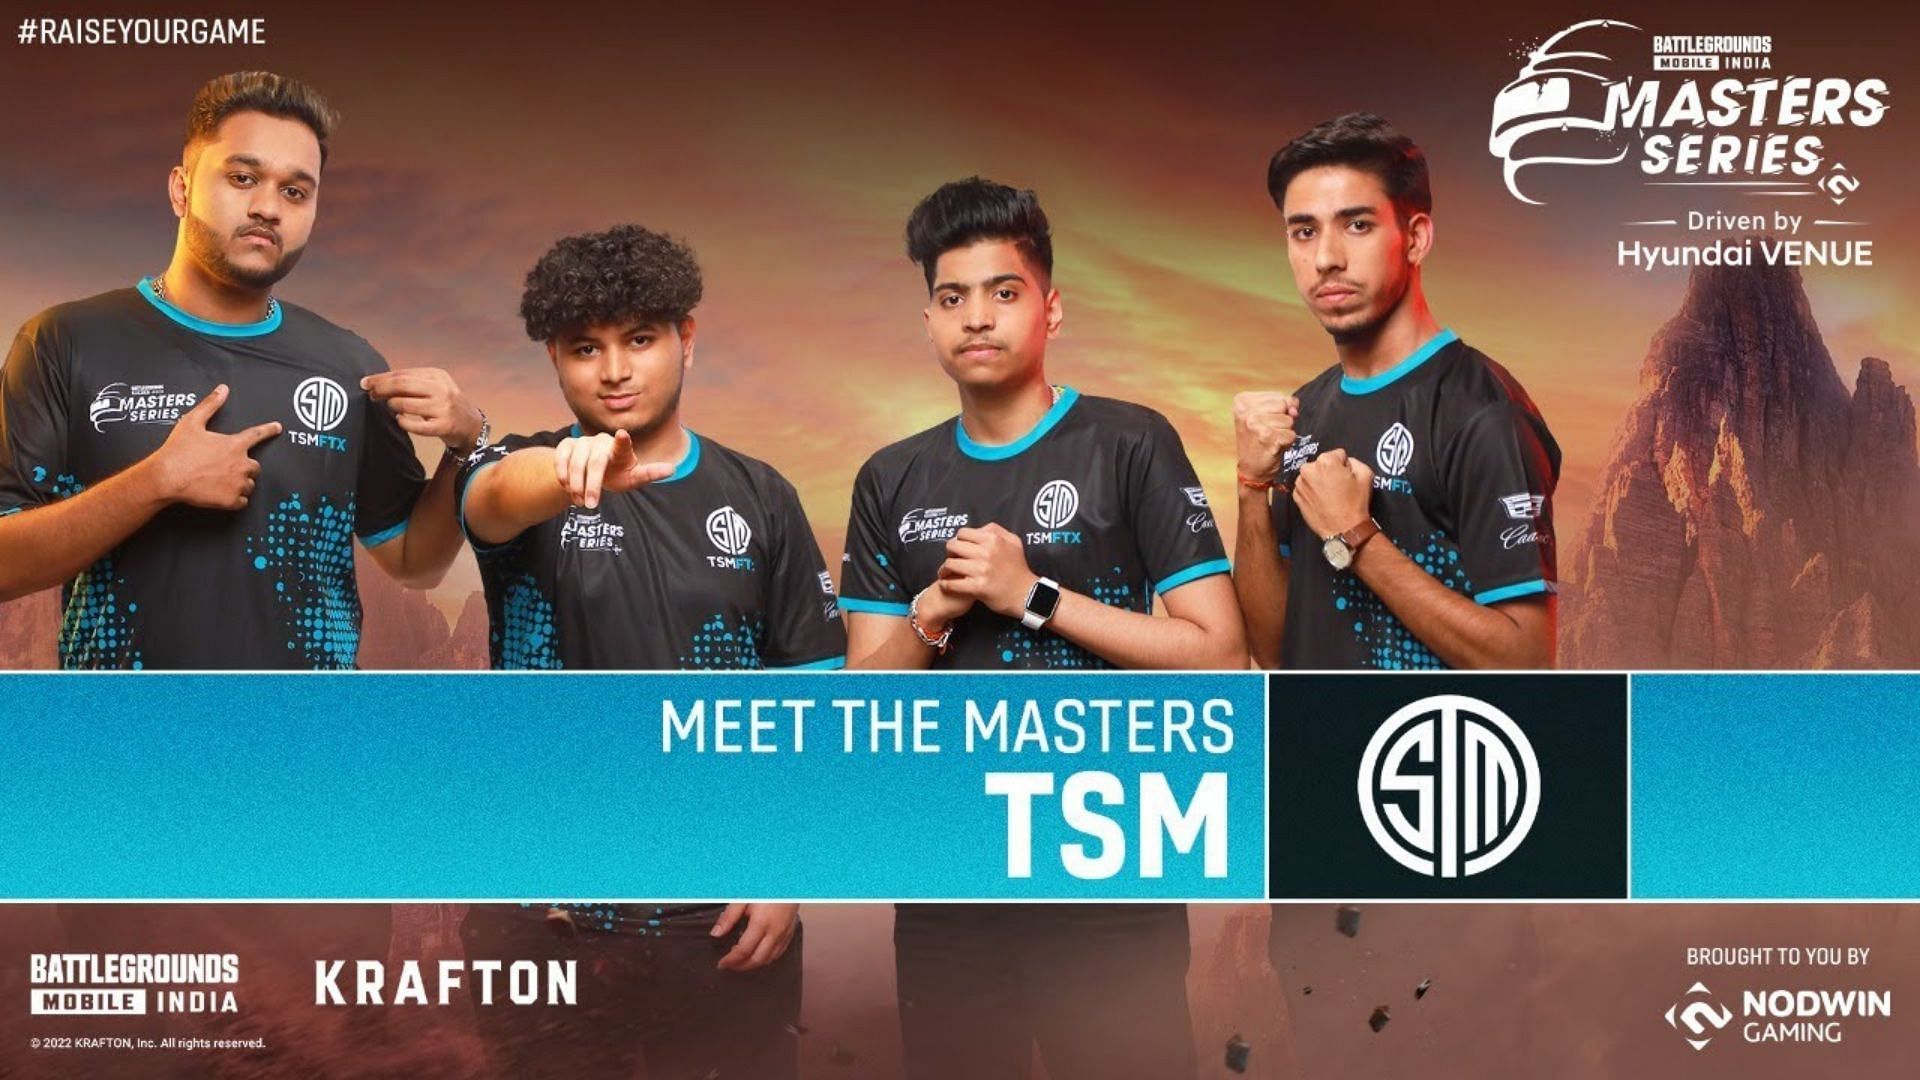 TSM failed to qualify for BGMI Masters Series Weekly finals (Image via Nodwin Gaming)